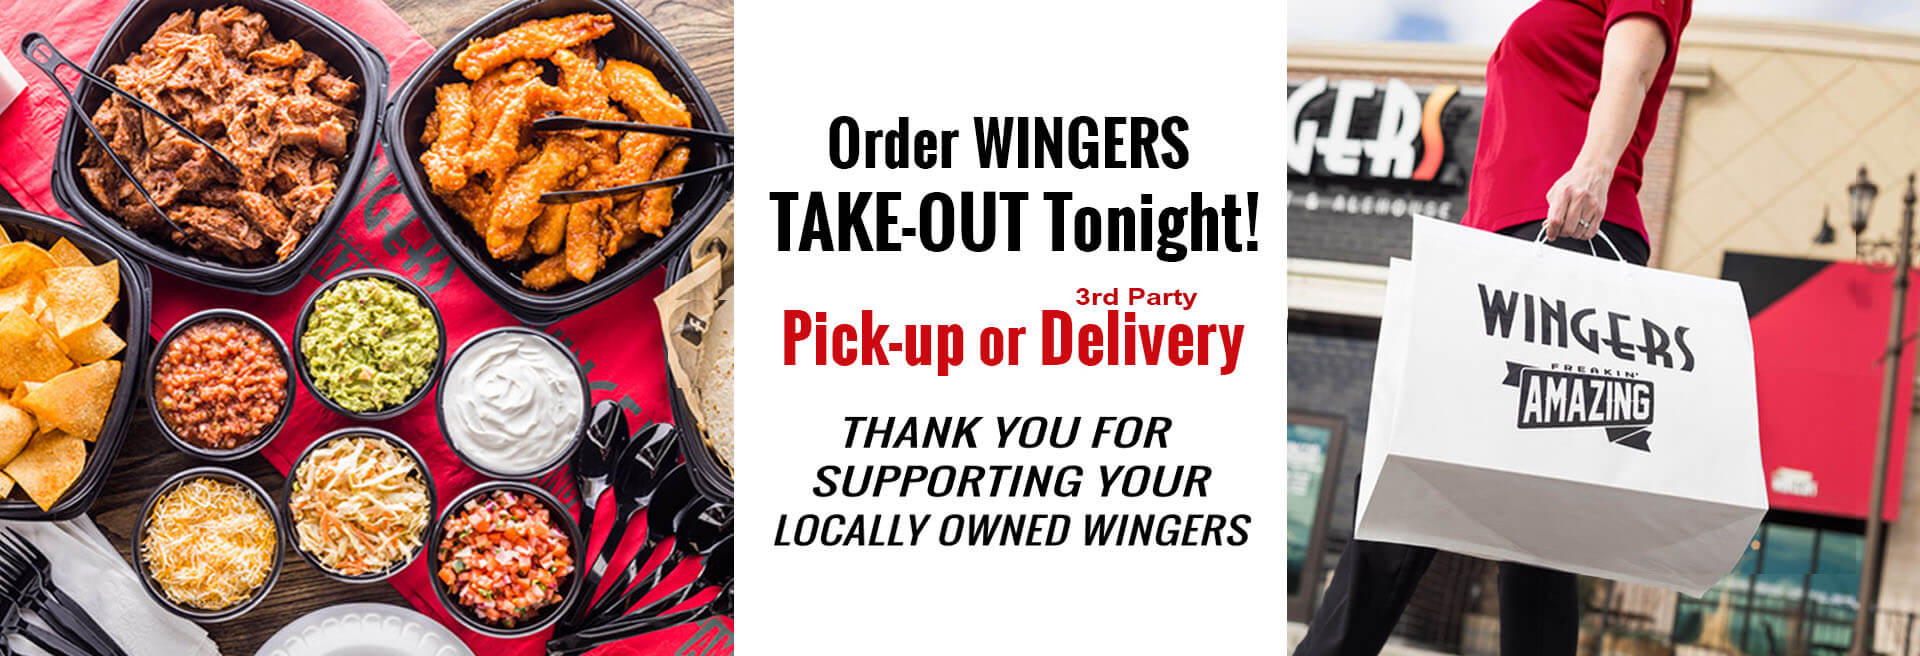 takeout image -WINGERS